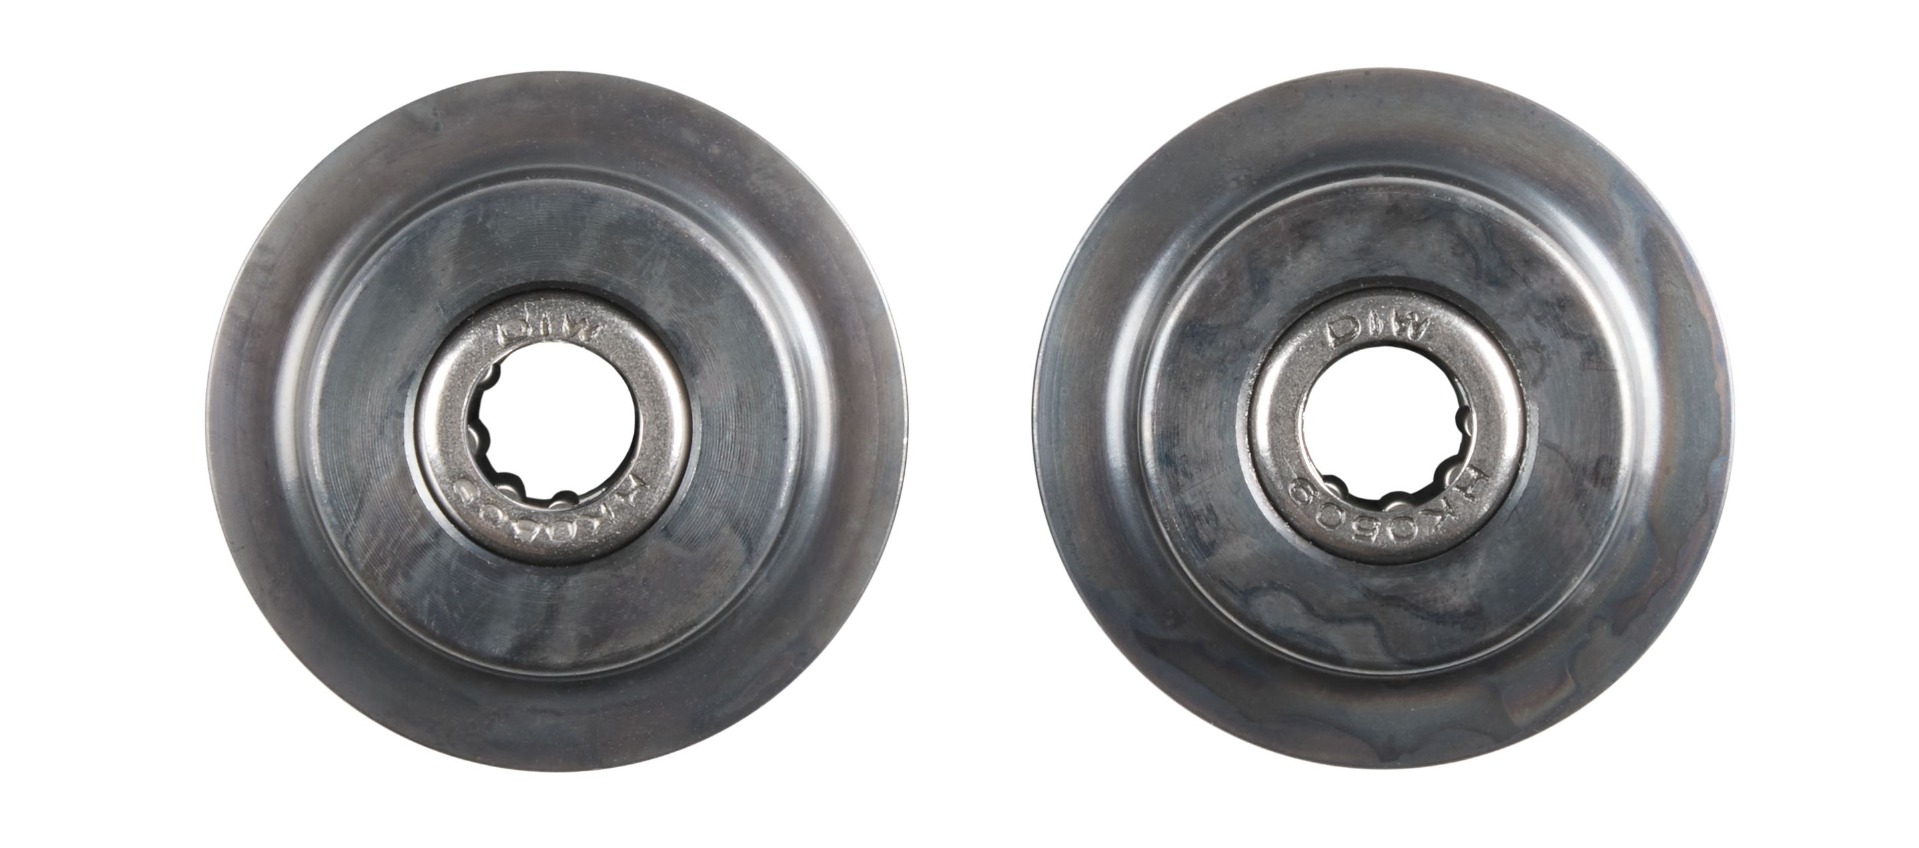 Replacement Wheel for M12™ Brushless 1-1/4" - 2" Copper Tubing Cutter (2 PK)